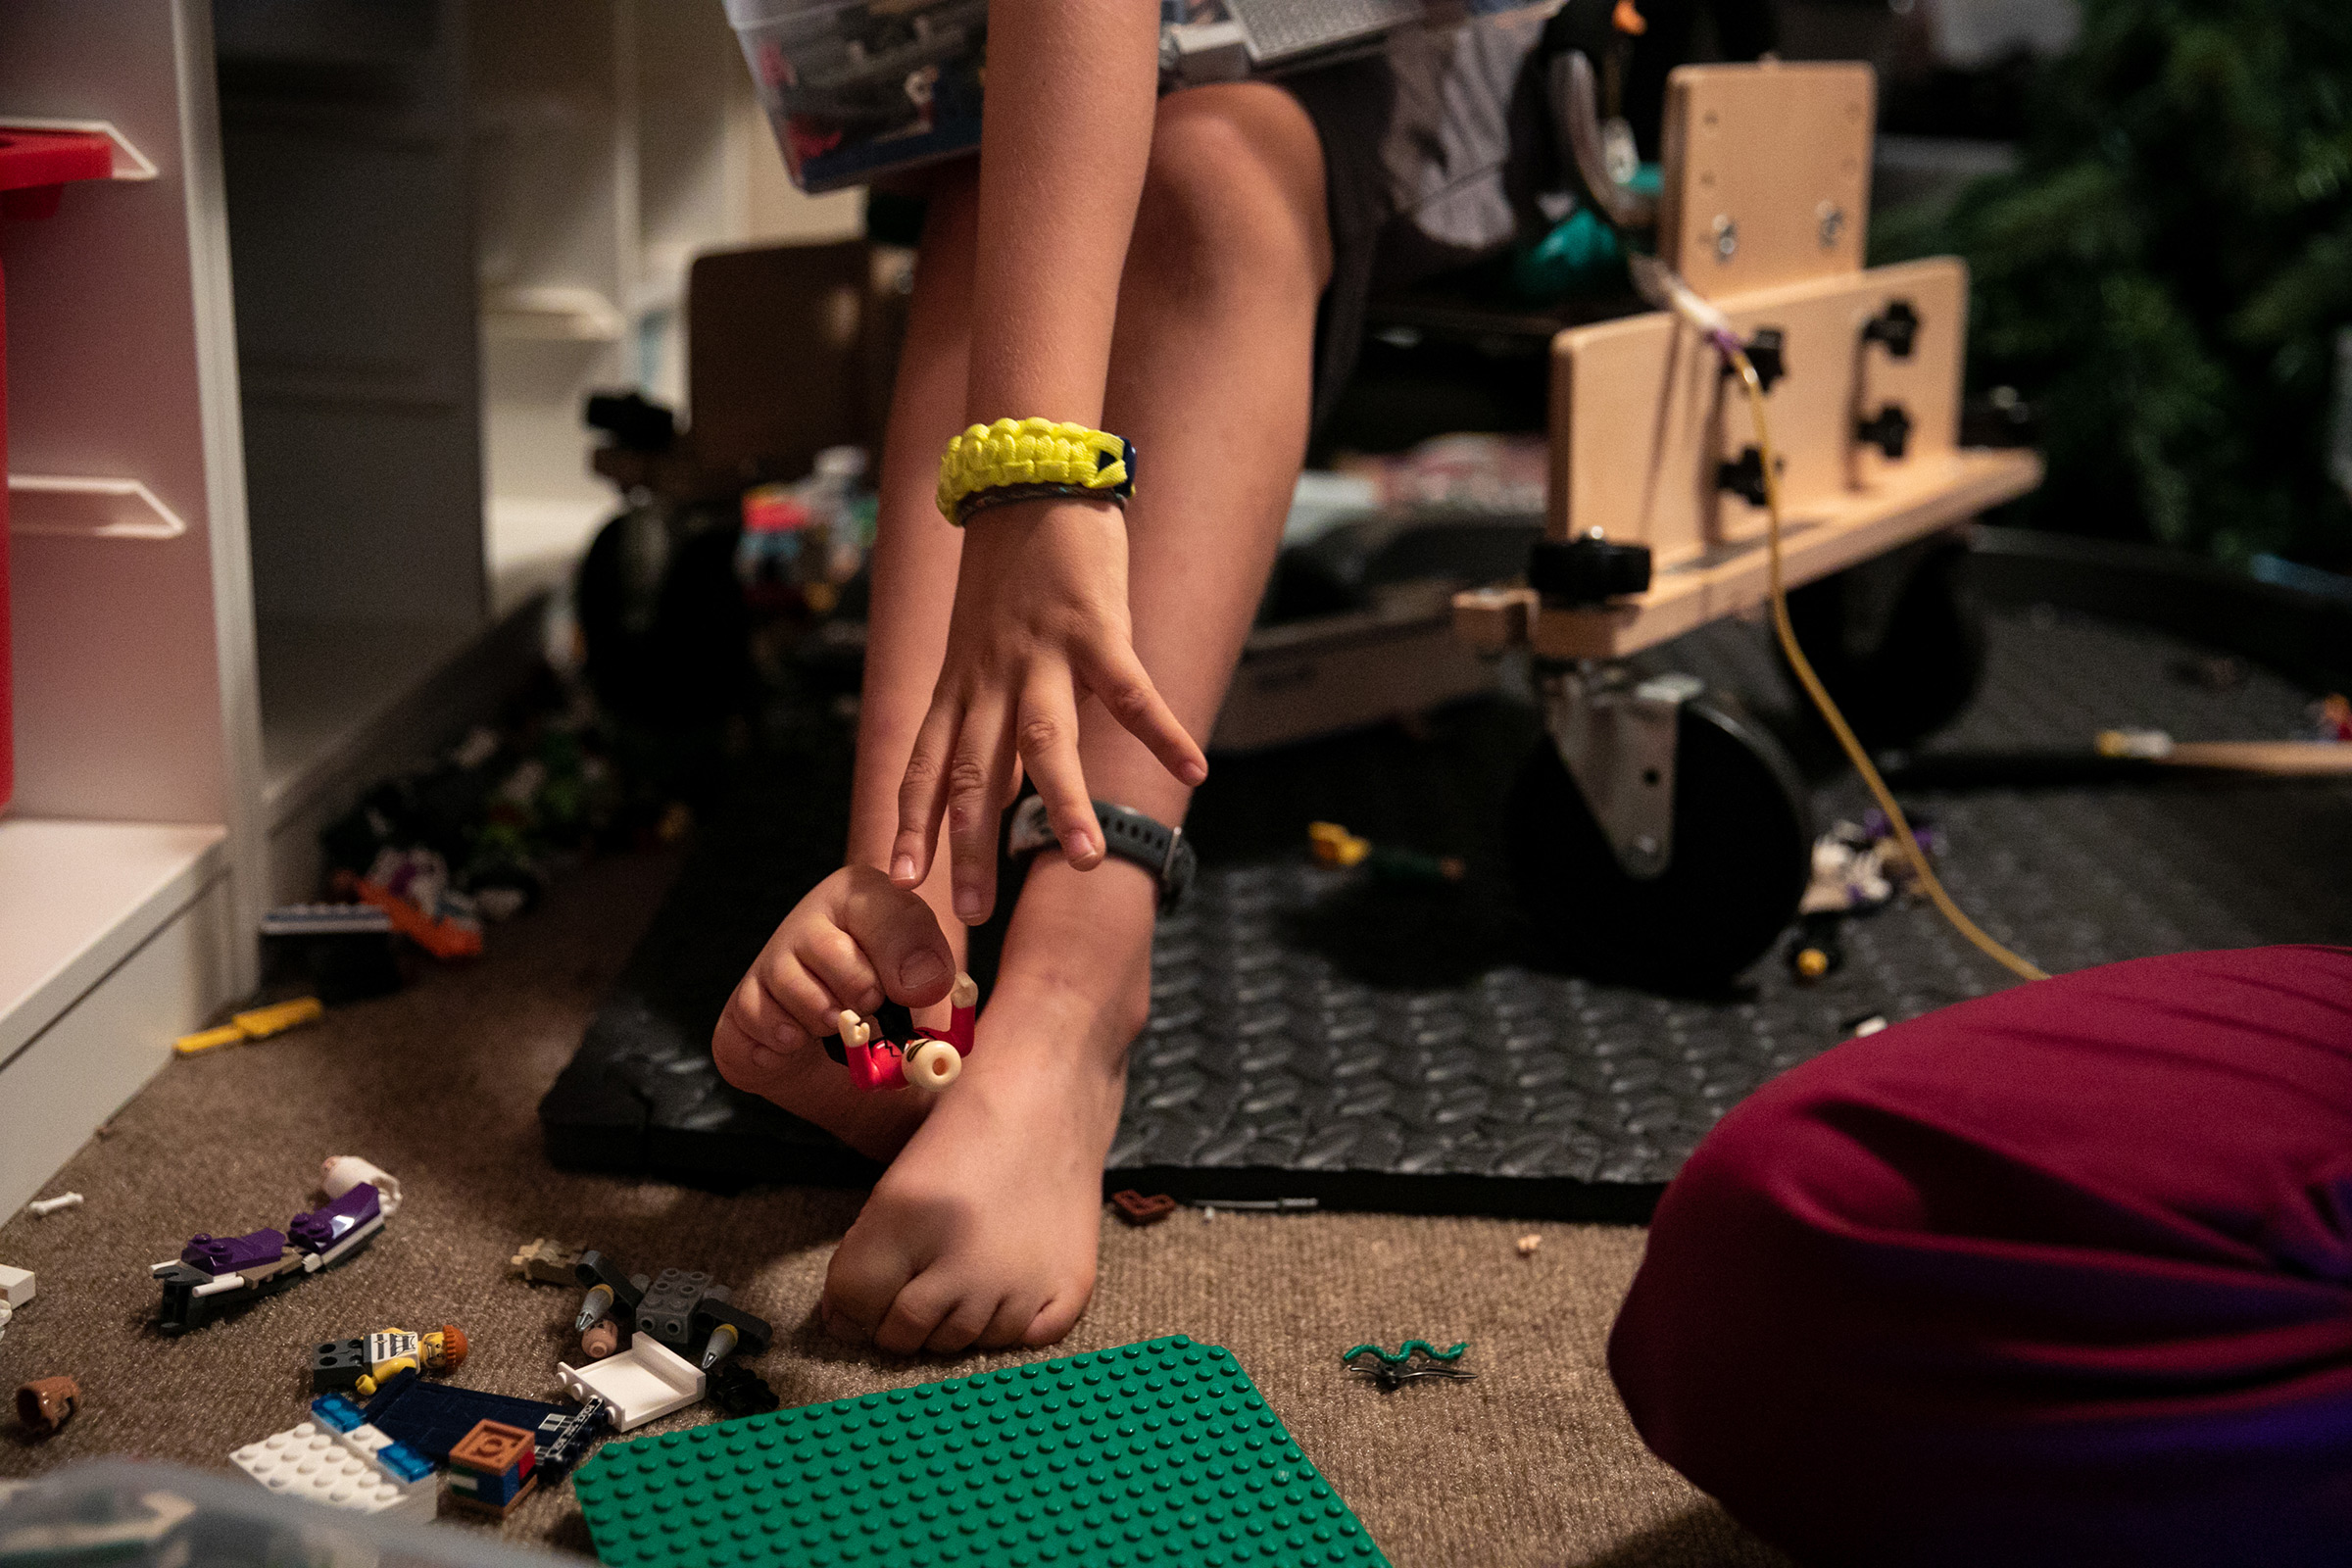 Braden uses his toes to reach for a LEGO on a break inbetween physical therapy treatments. (Ilana Panich-Linsman for TIME)